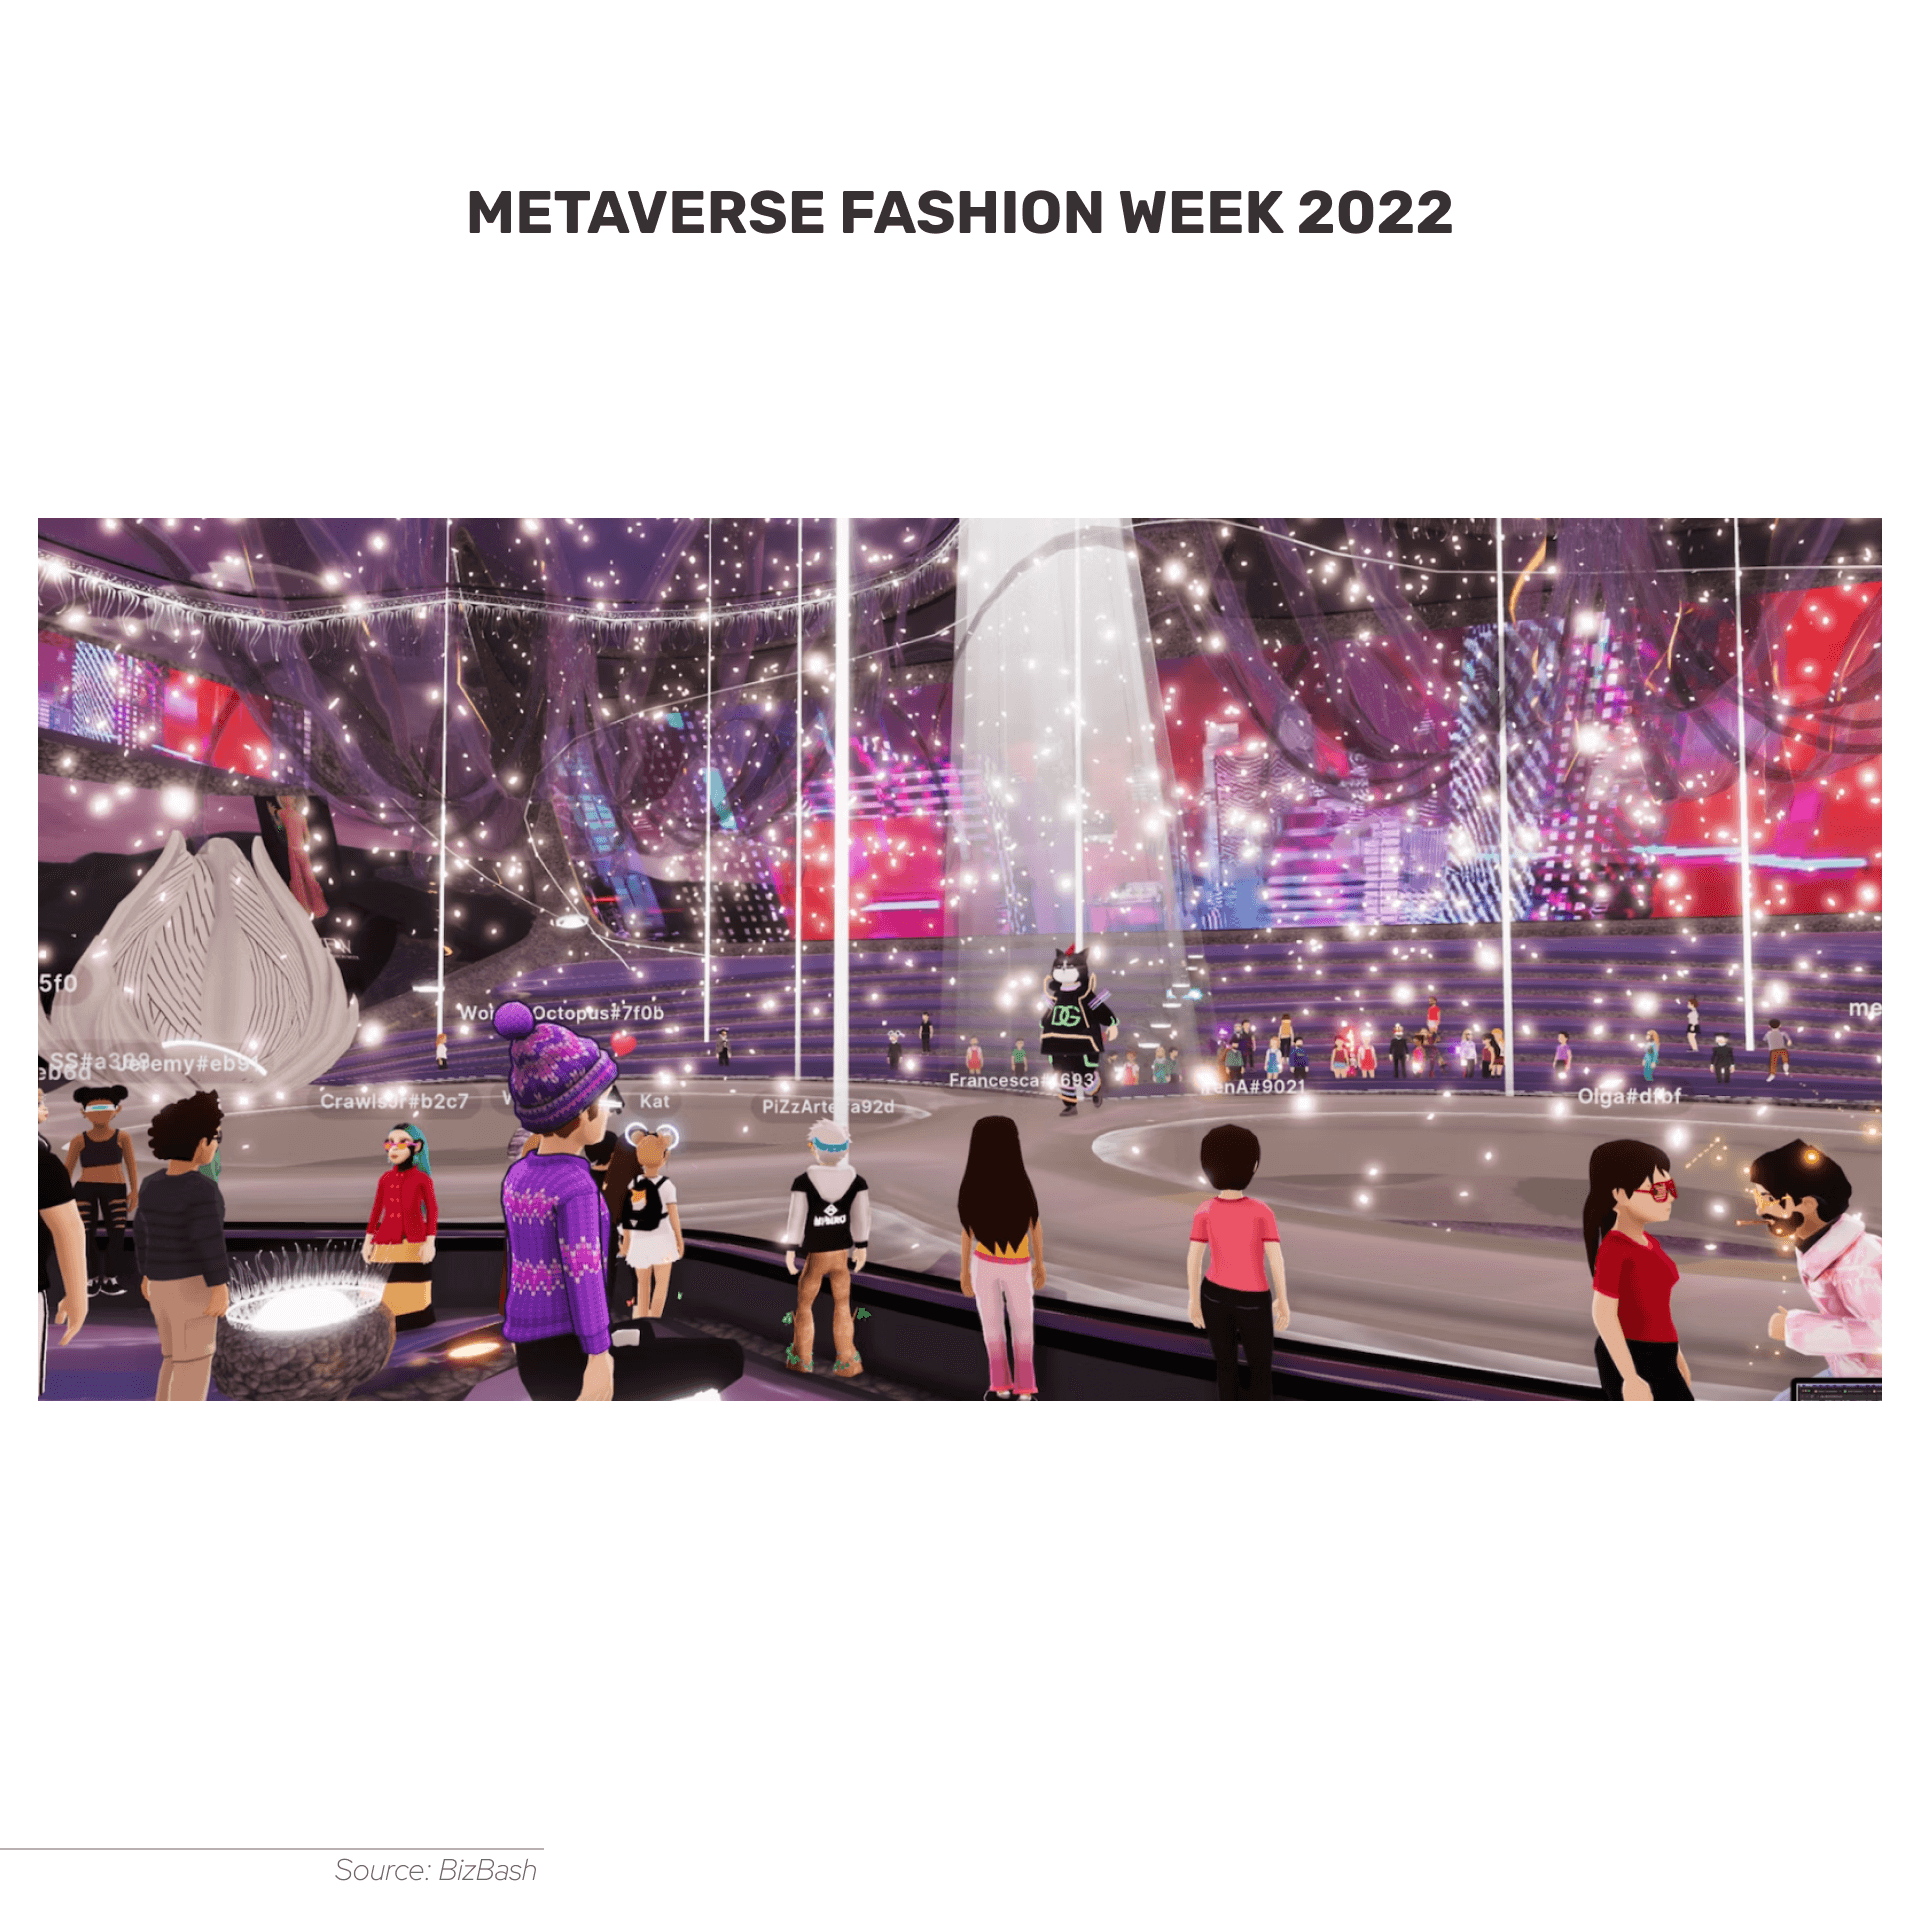 Metaverse Fashion Week 2022 attracted many luxurious brands such as Dolce & Gabbana, Tommy Hilfiger, and DKNY.